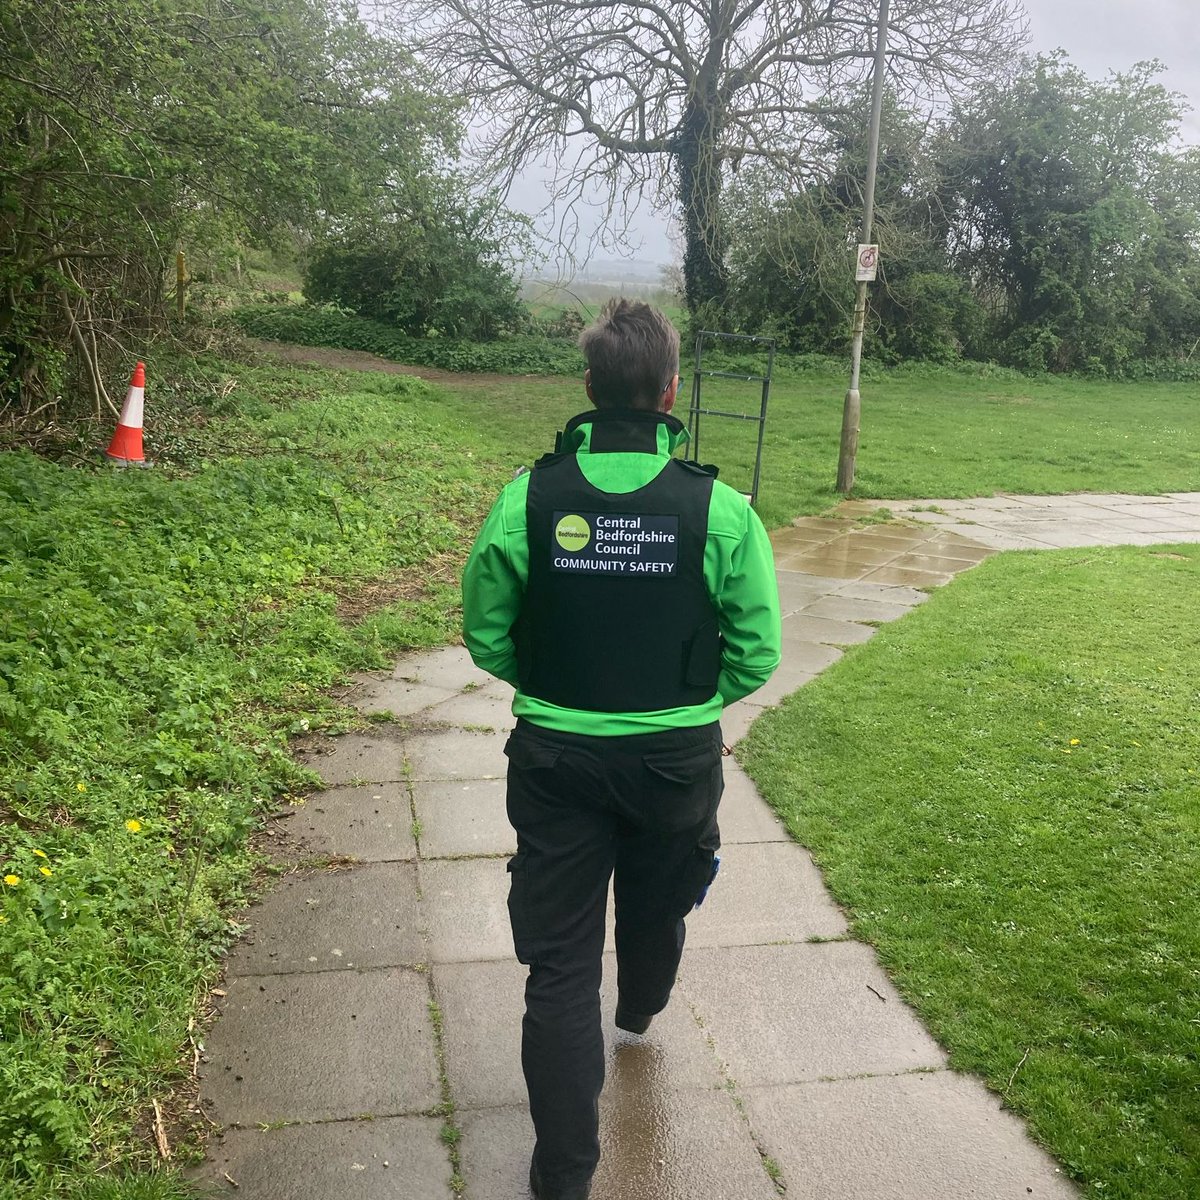 Areas patrolled so far this week by @letstalkcentral Safer Neighbourhood Officers, include Houghton Regis, Toddington and Meppershall. We will continue these regular patrols to help deter nuisance behaviour @HRCouncil1